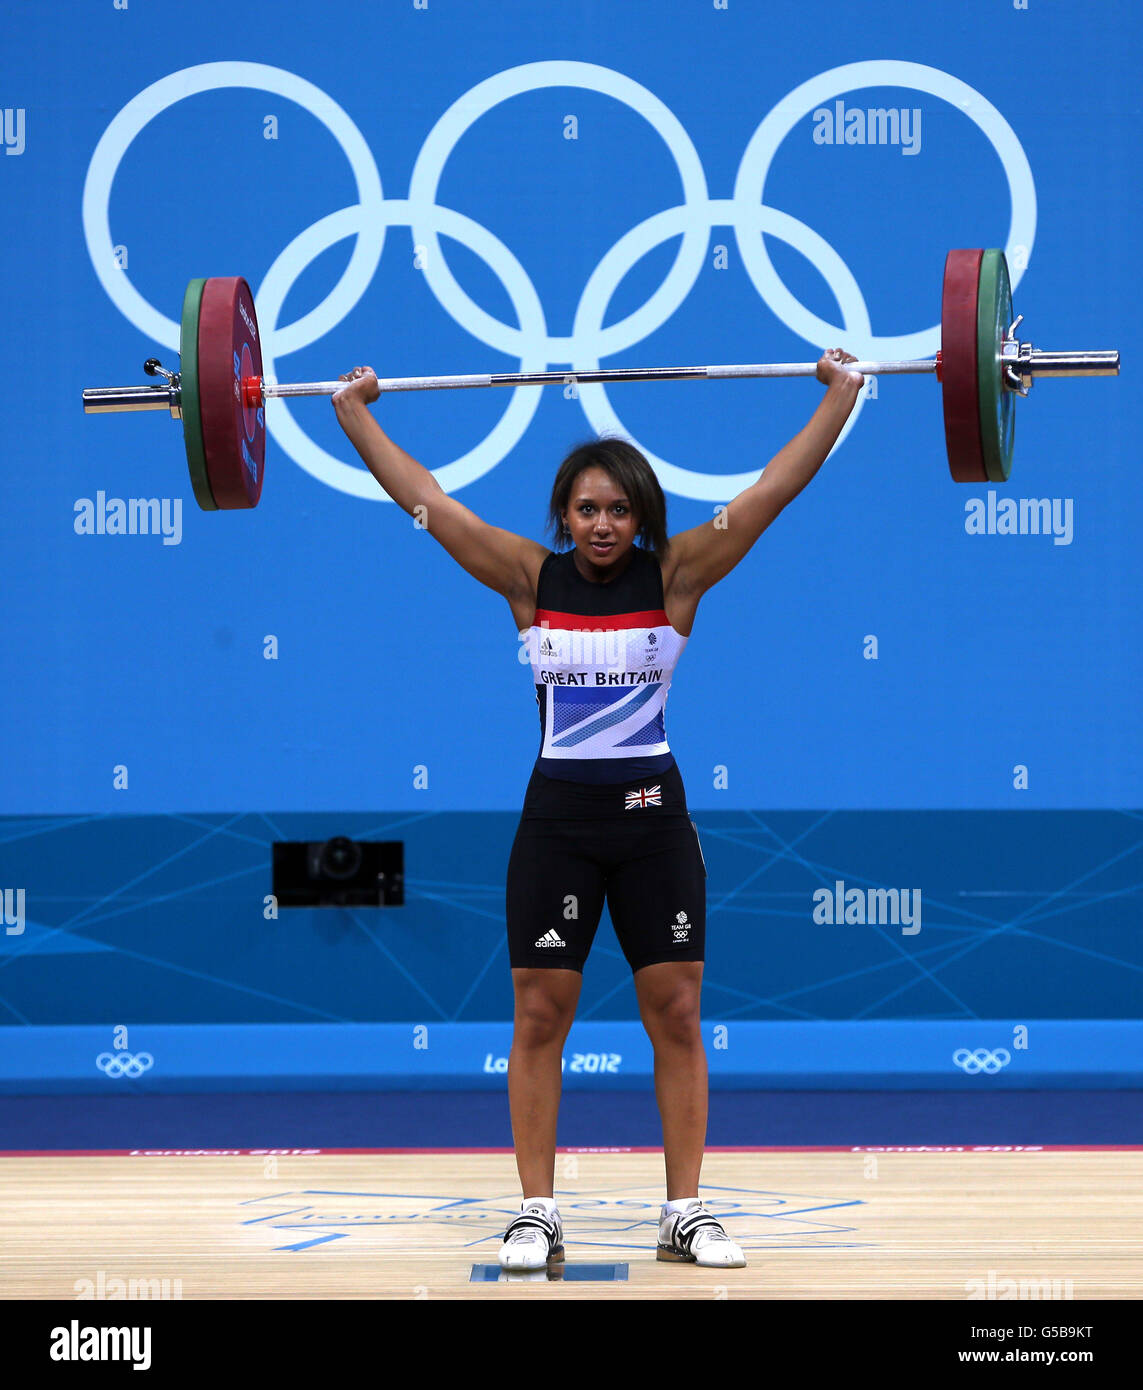 Great Britain's Zoe Smith lifts during the women's 58kg group at the ExCeL London. Stock Photo